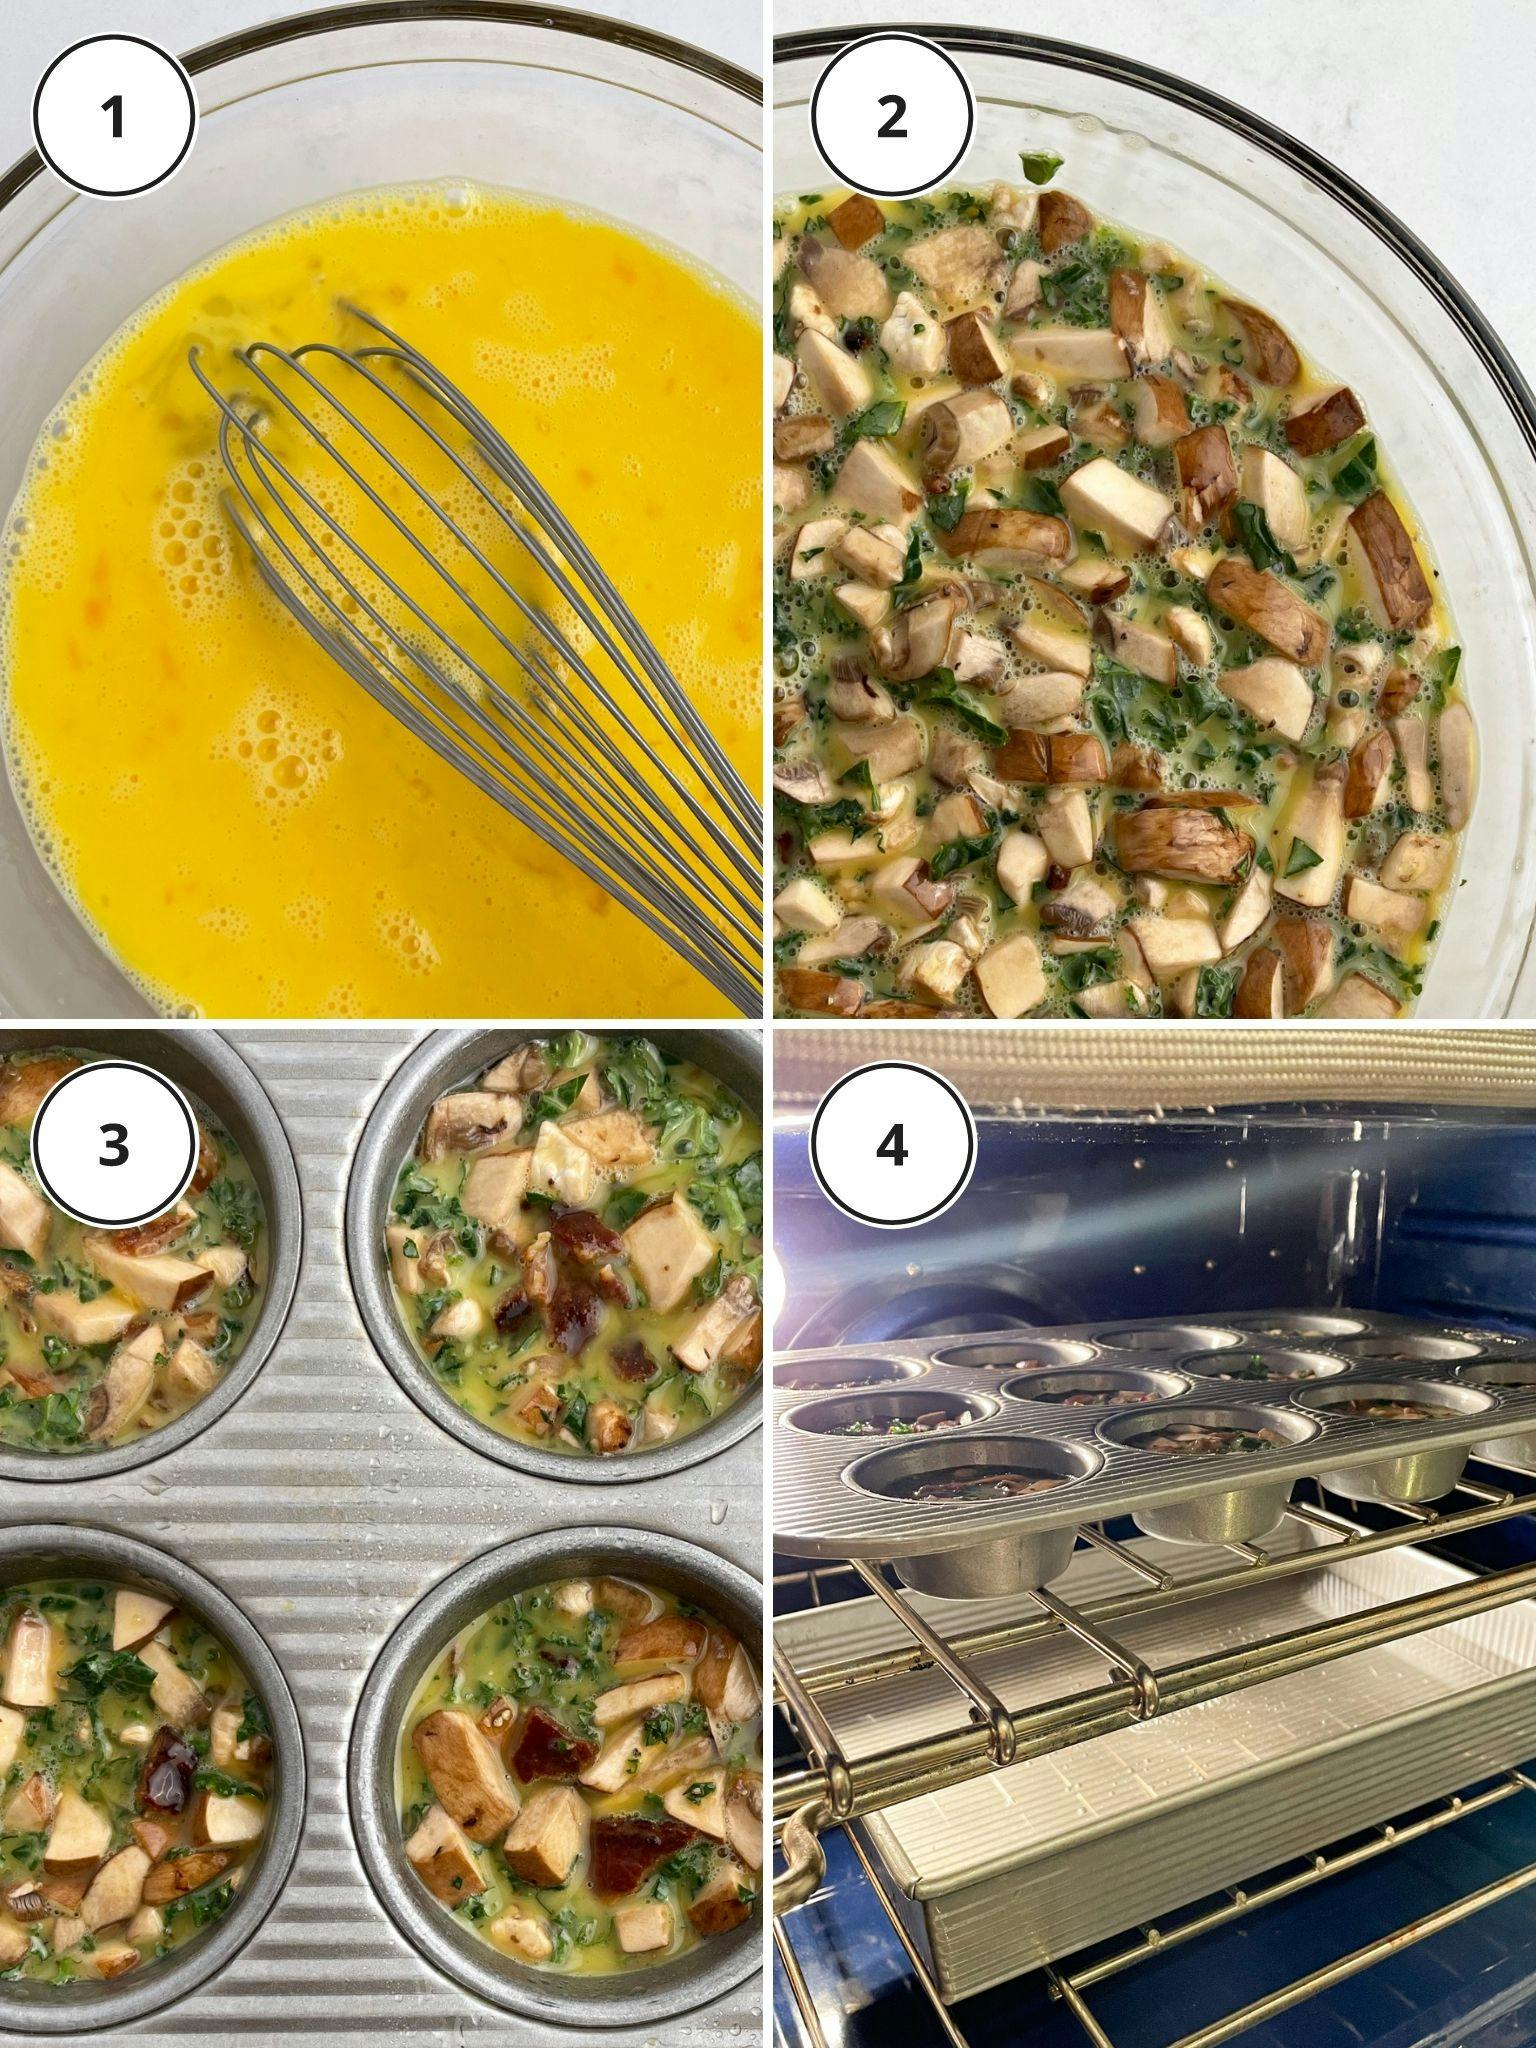 Step by step process of the recipe.